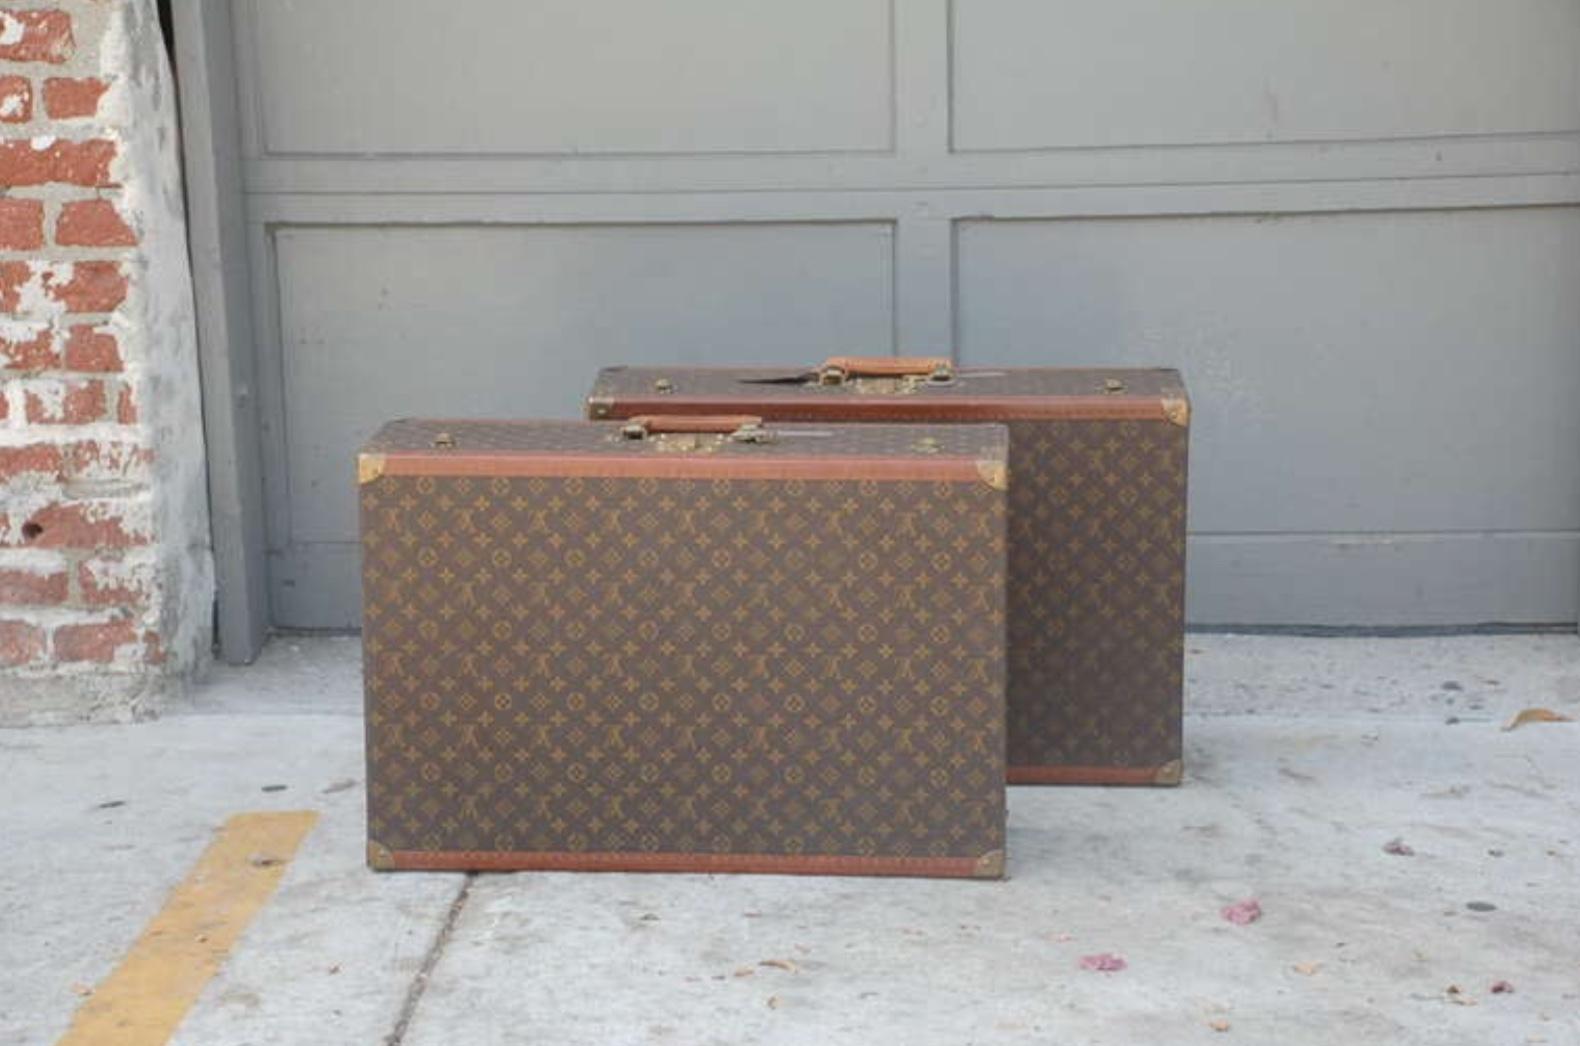 Pair of Authentic Louis Vuitton Luggage pieces. 

Individually numbered, Pair of brass numbered keys included with both pieces.

Can be mounted as side tables / night stands.